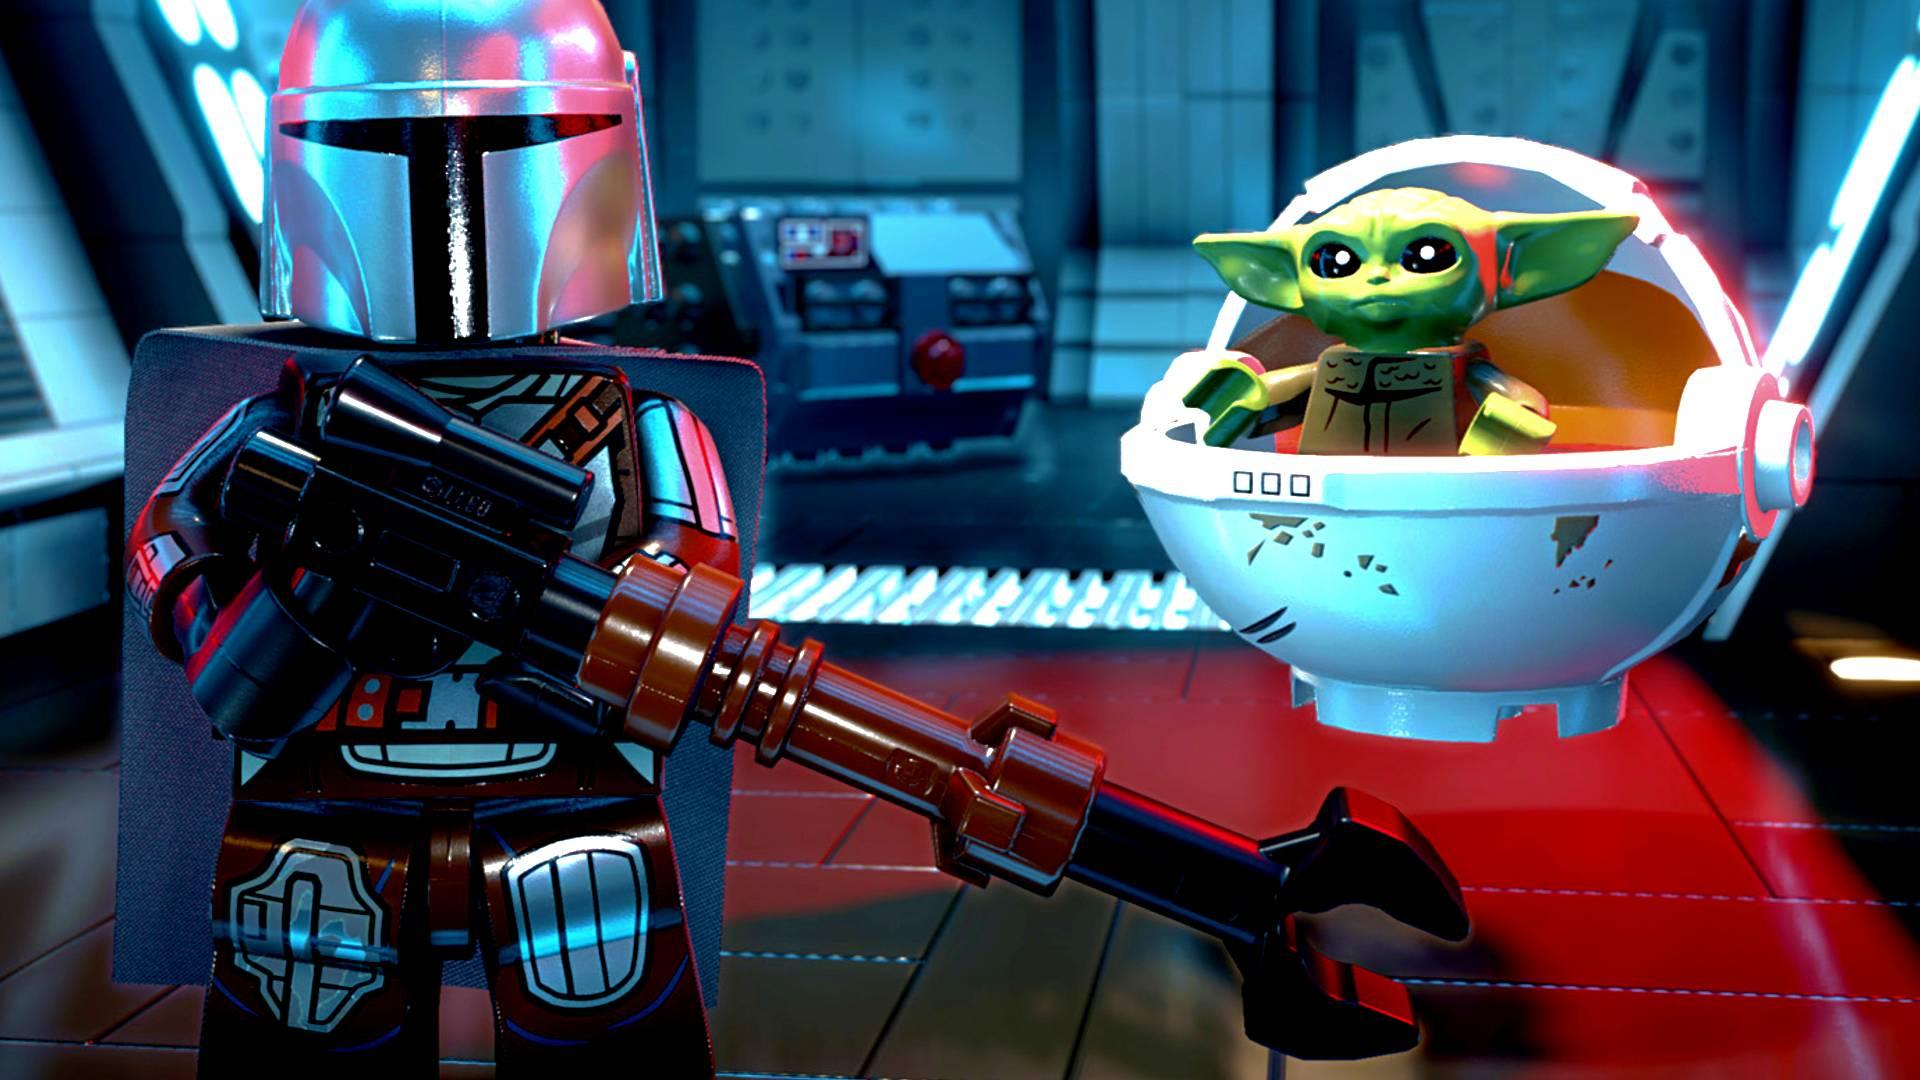 Lego Star Wars The Skywalker Saga DLC, Rogue One, and more The Loadout